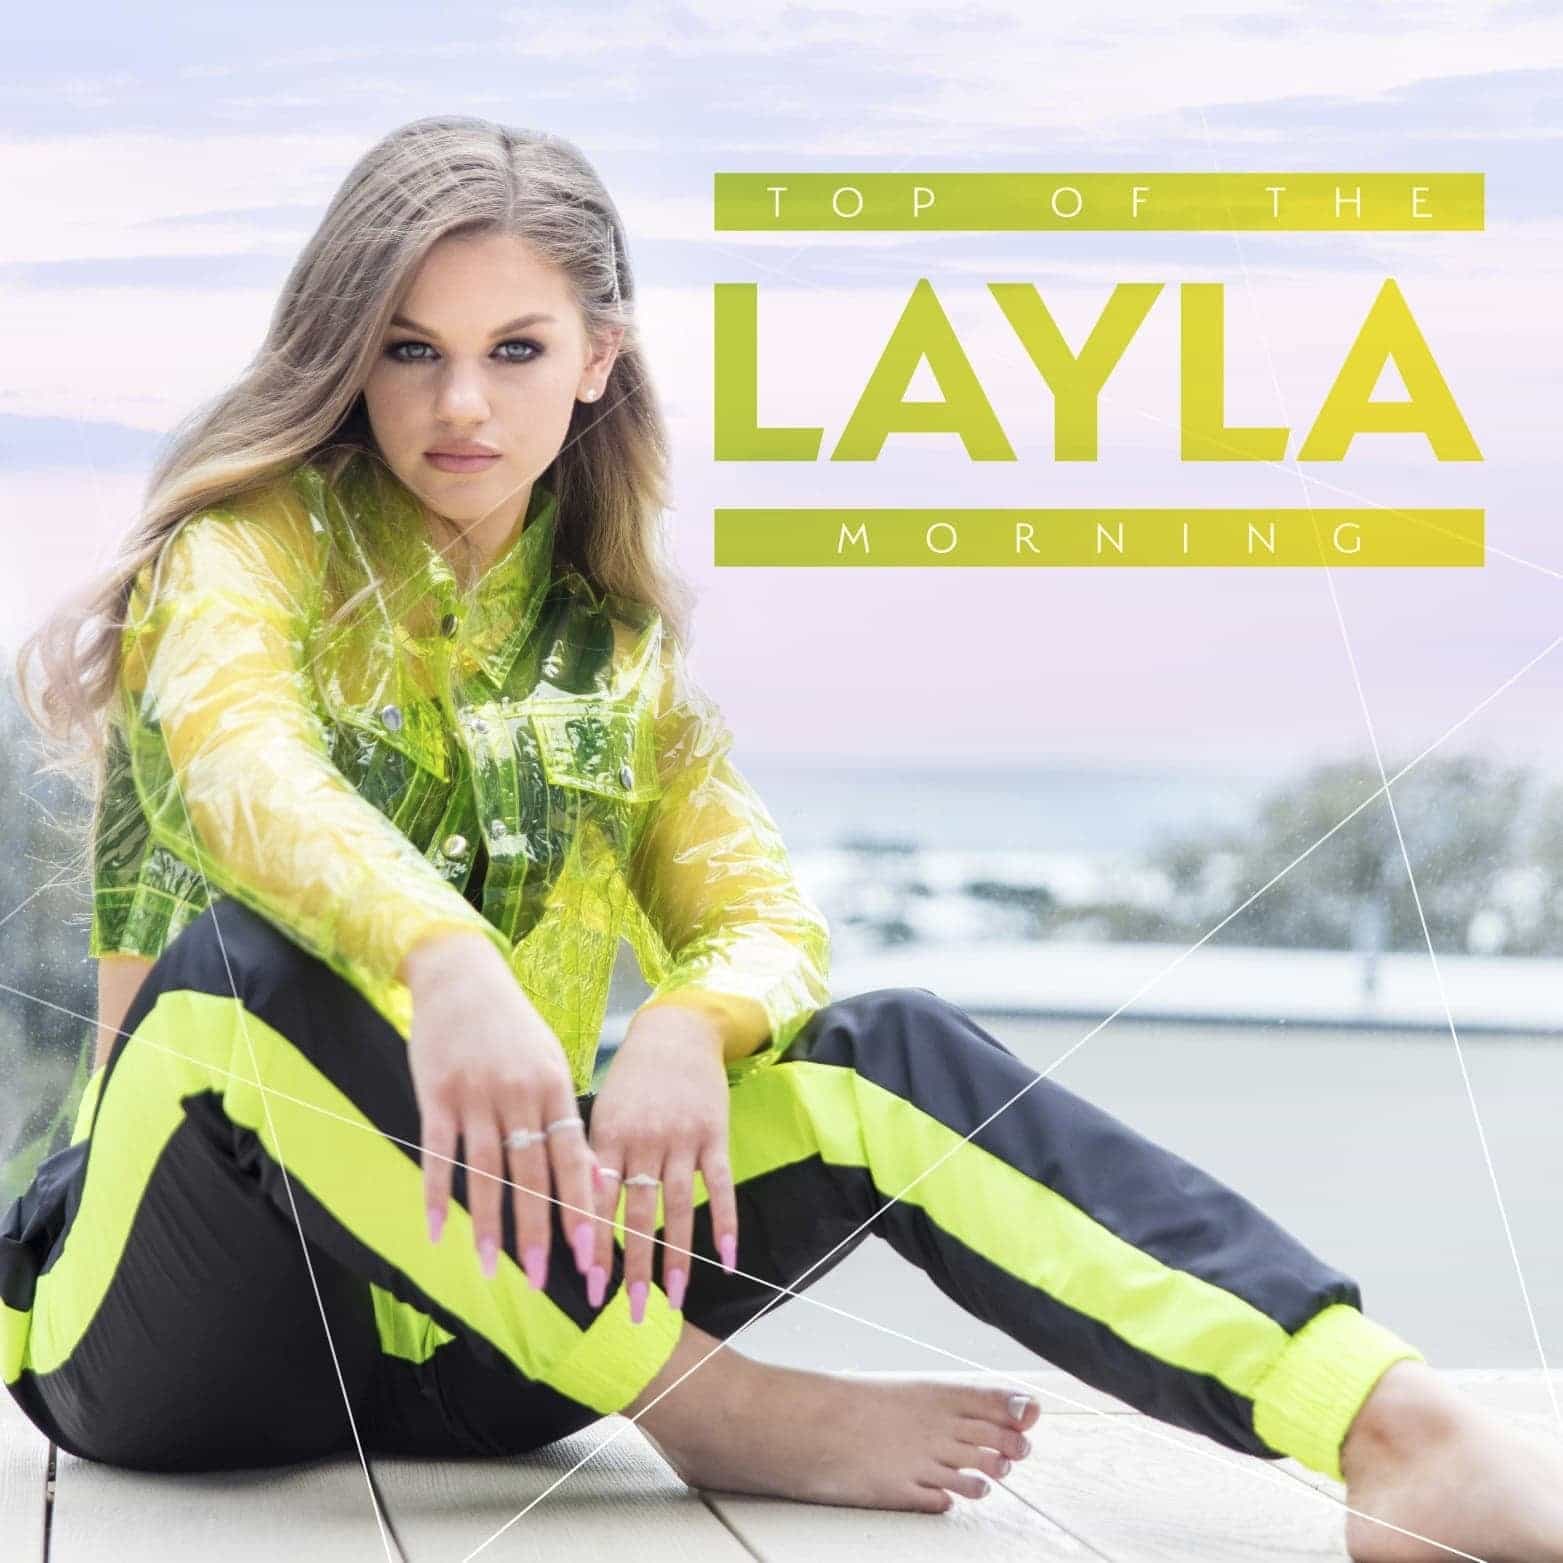 Layla Haskell - Top of the Morning